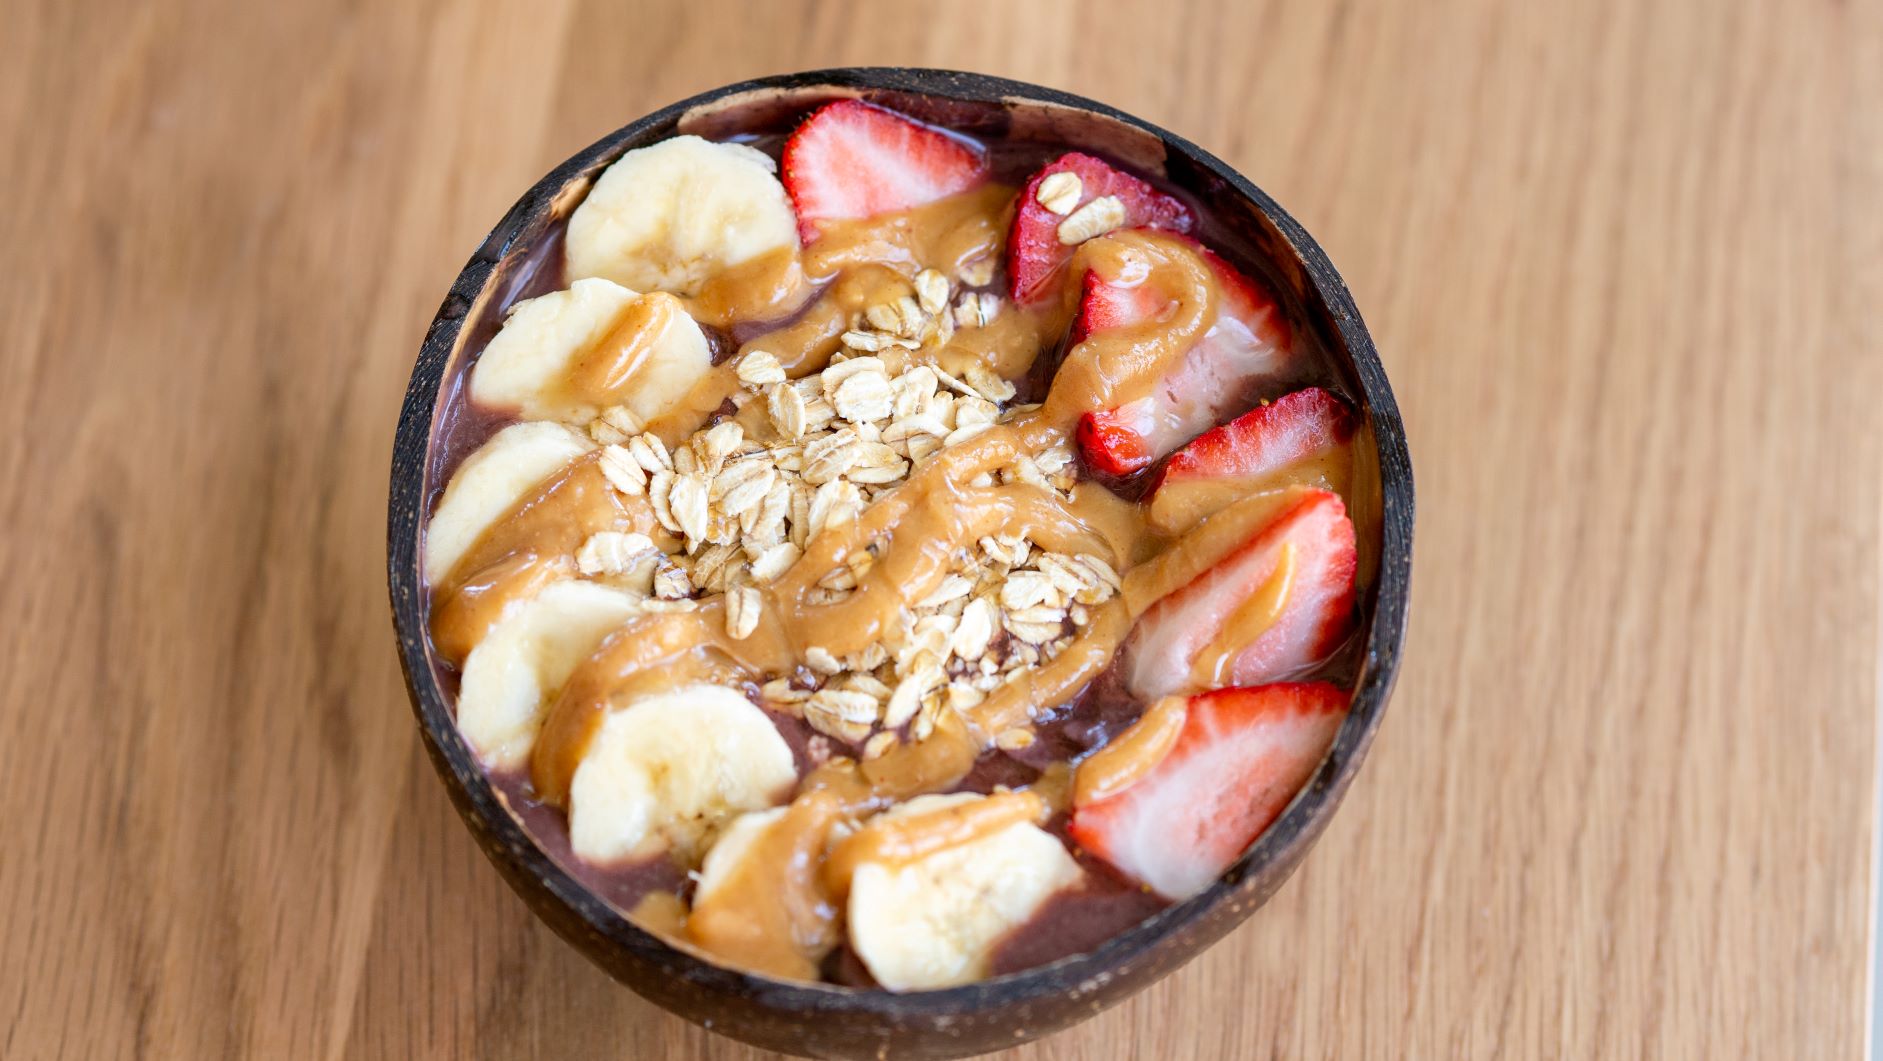 Acai Power Bowl (served all day!)